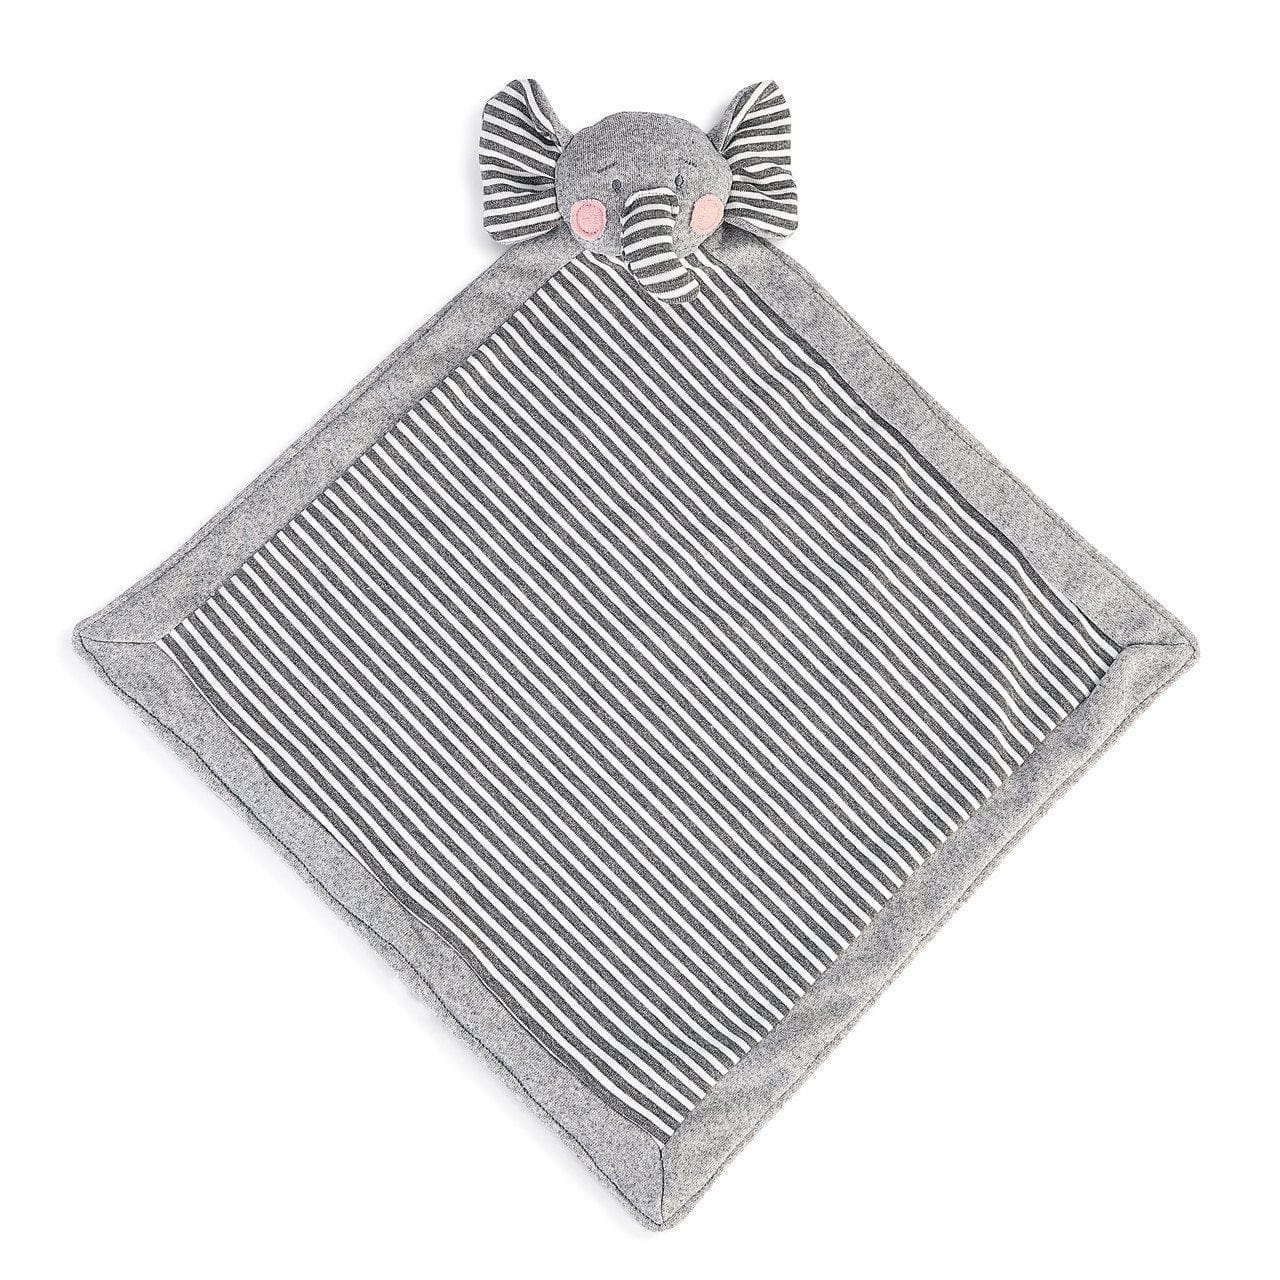 Elephant Jersey Knit Baby Cuddle Blankie - The Pink Pigs, A Compassionate Boutique